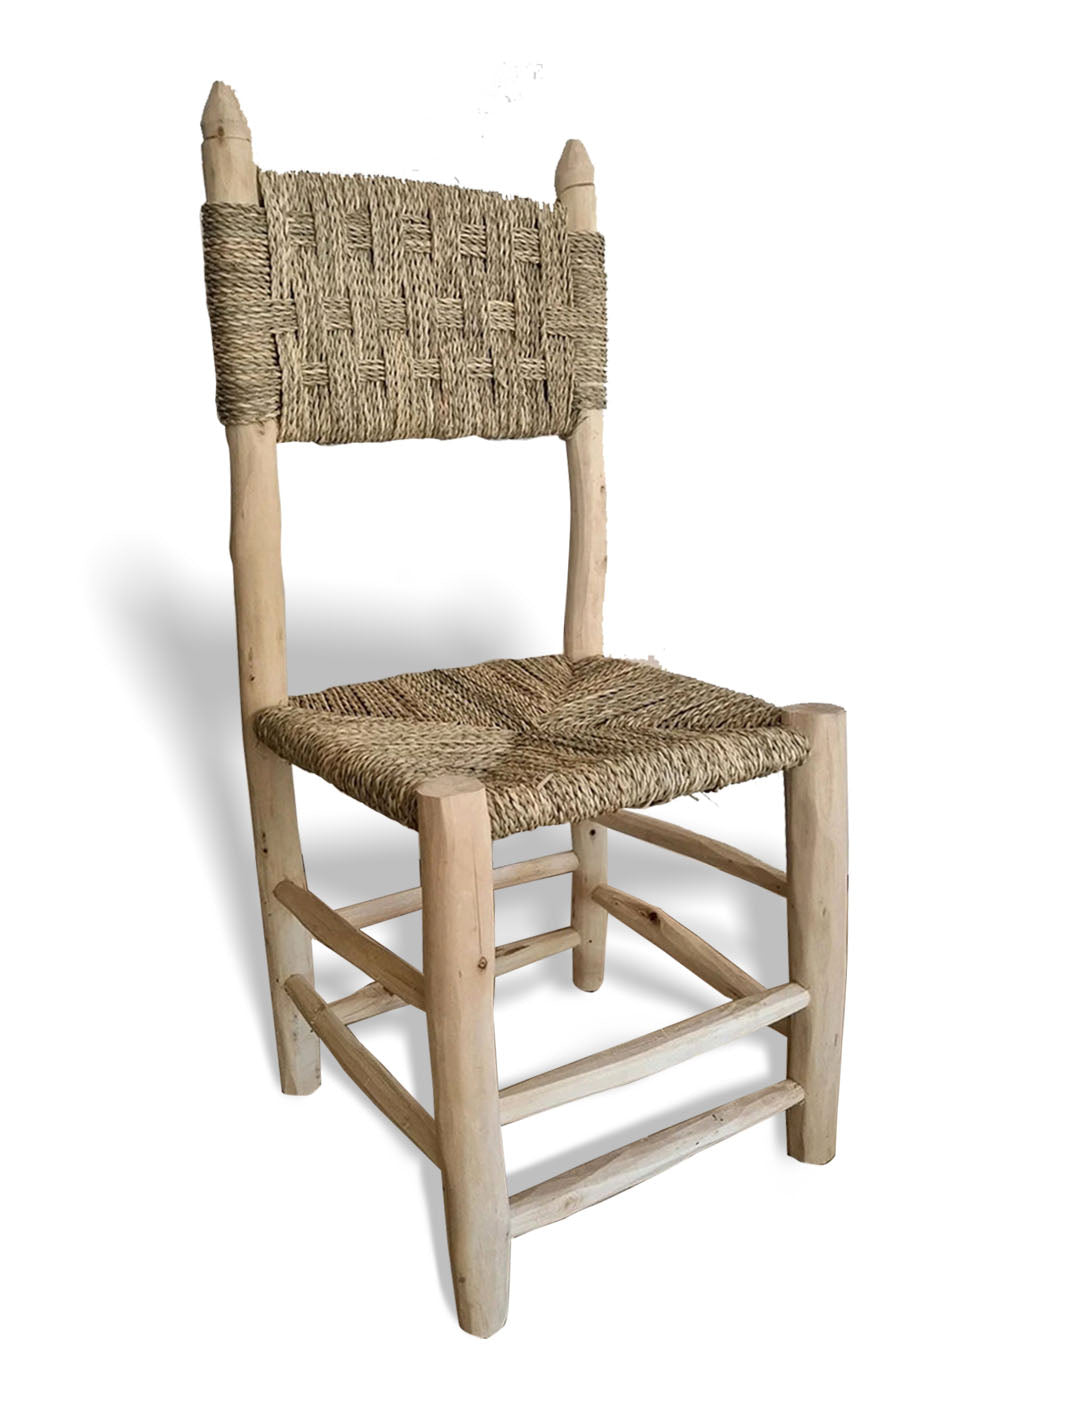 Handcrafted Laurel Wood Artisanal Moroccan Chair Libitii Chairs LIB-0027